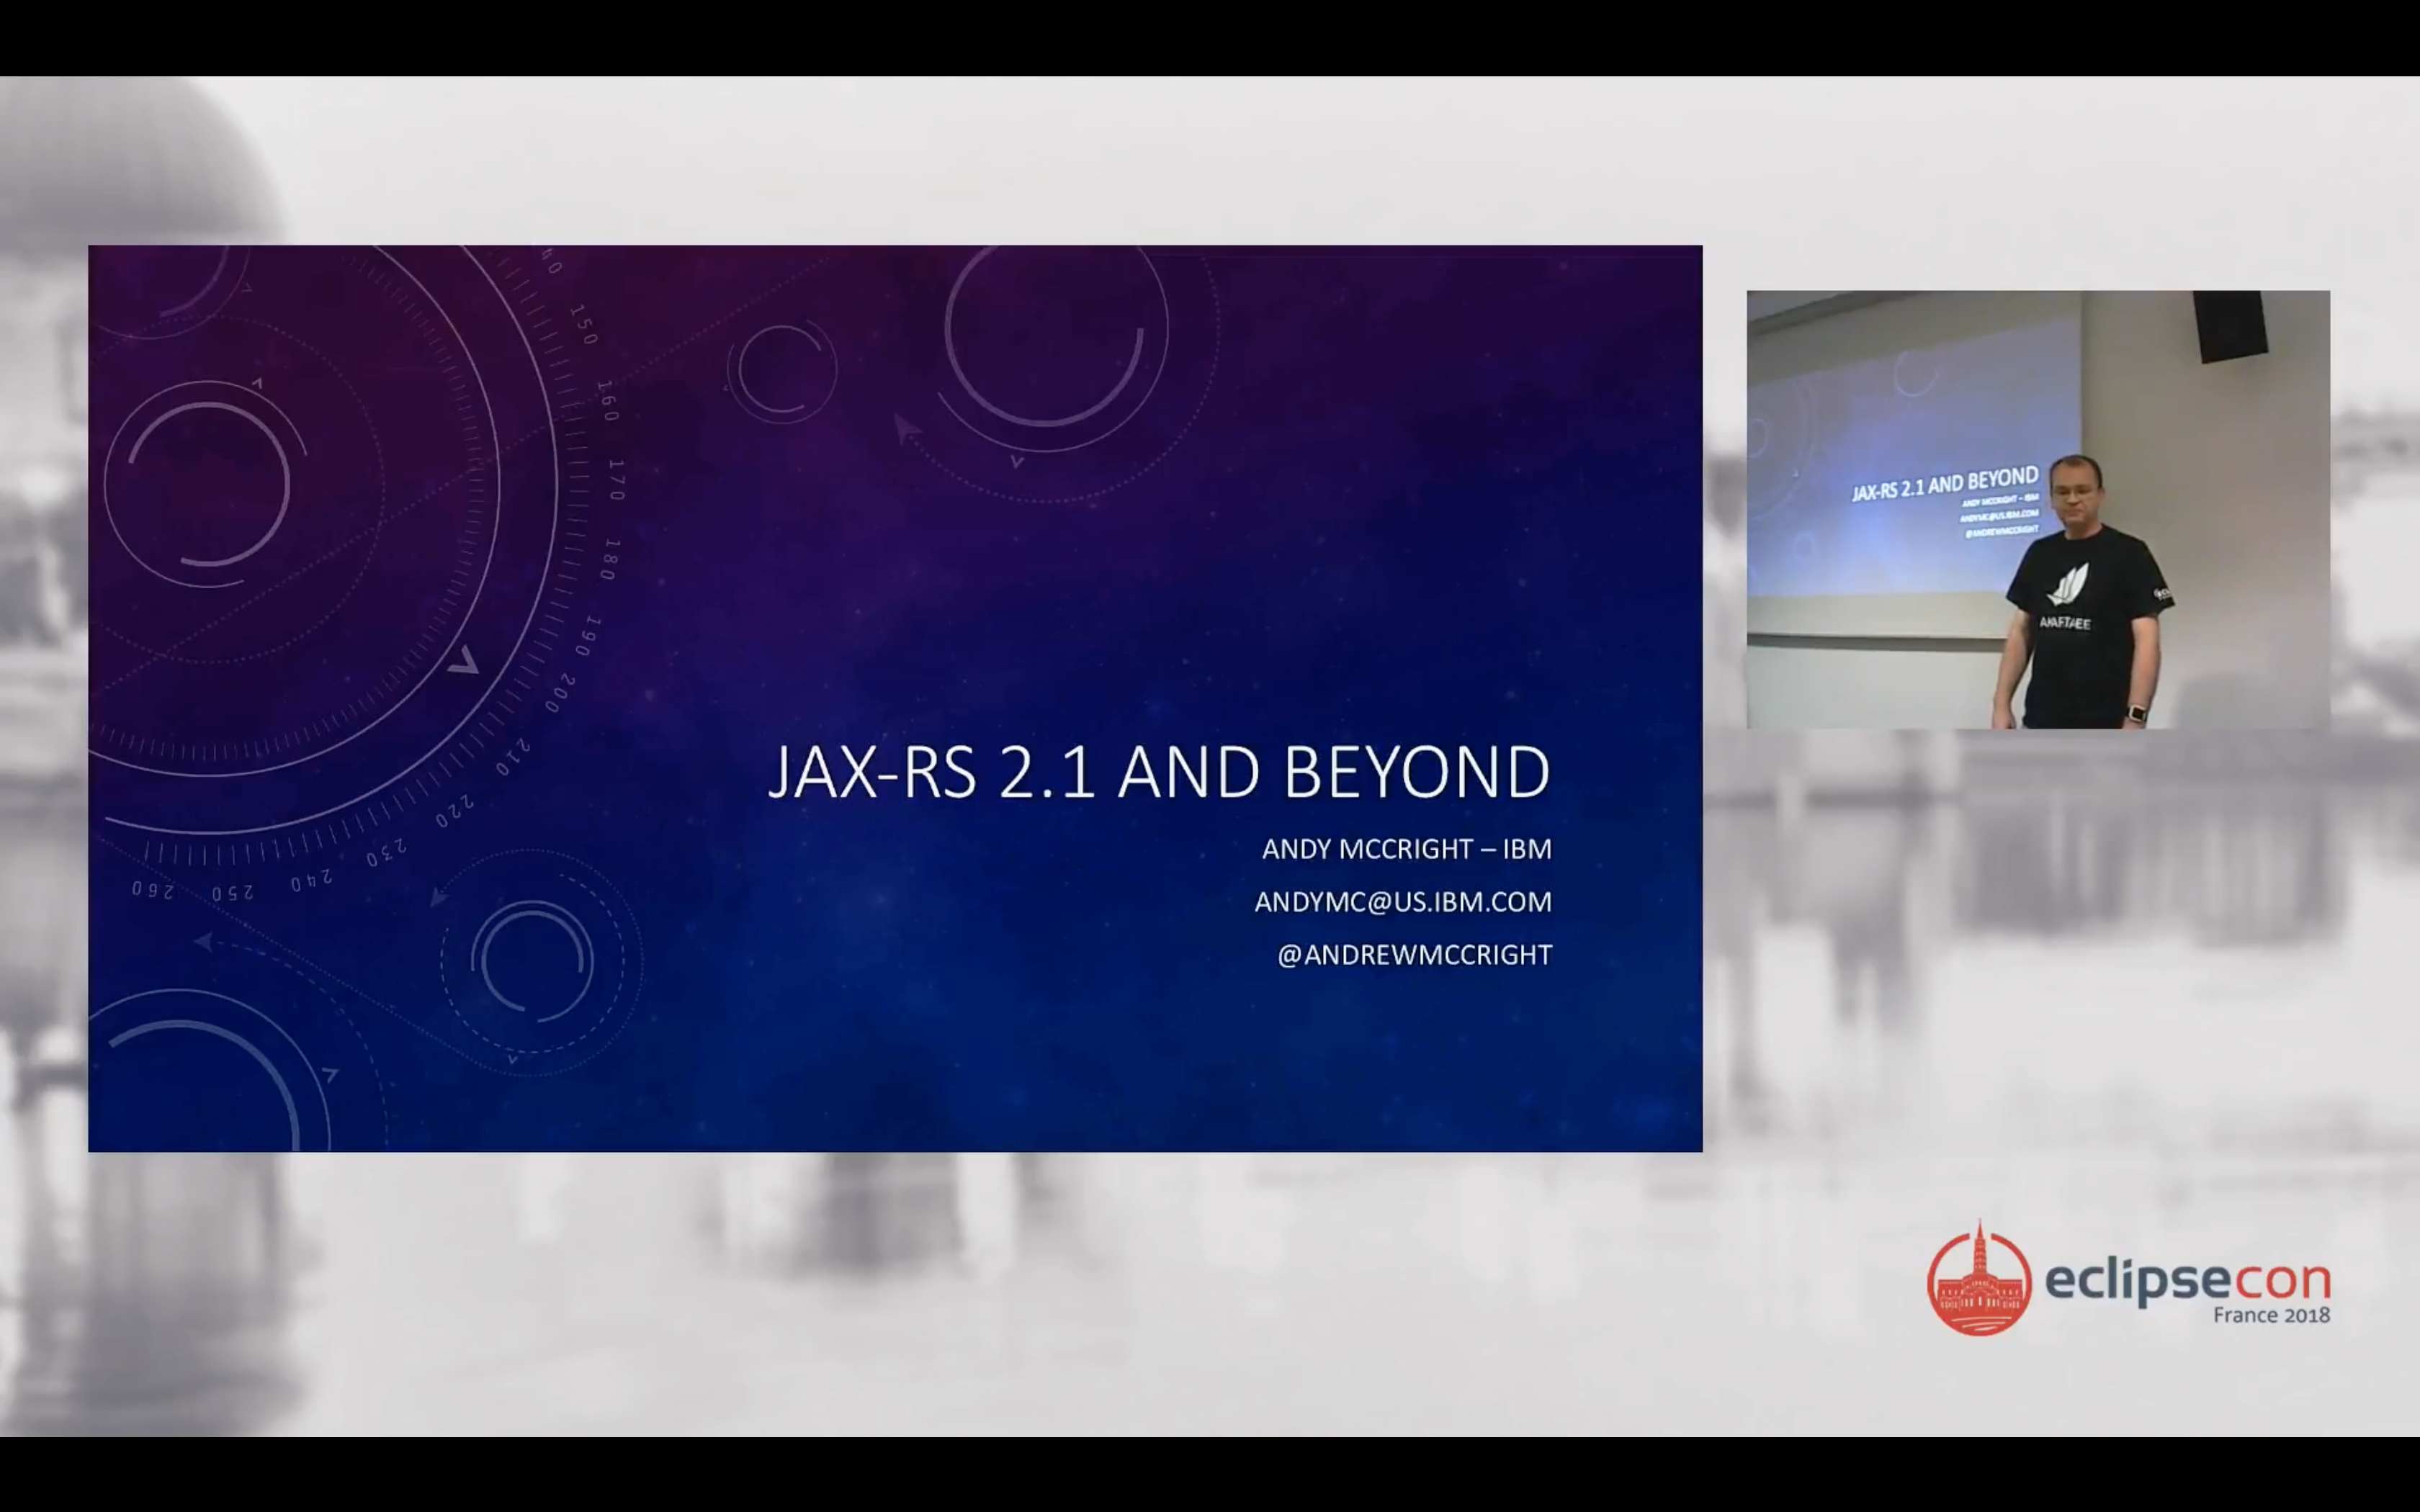 Andy presenting about JAX-RS